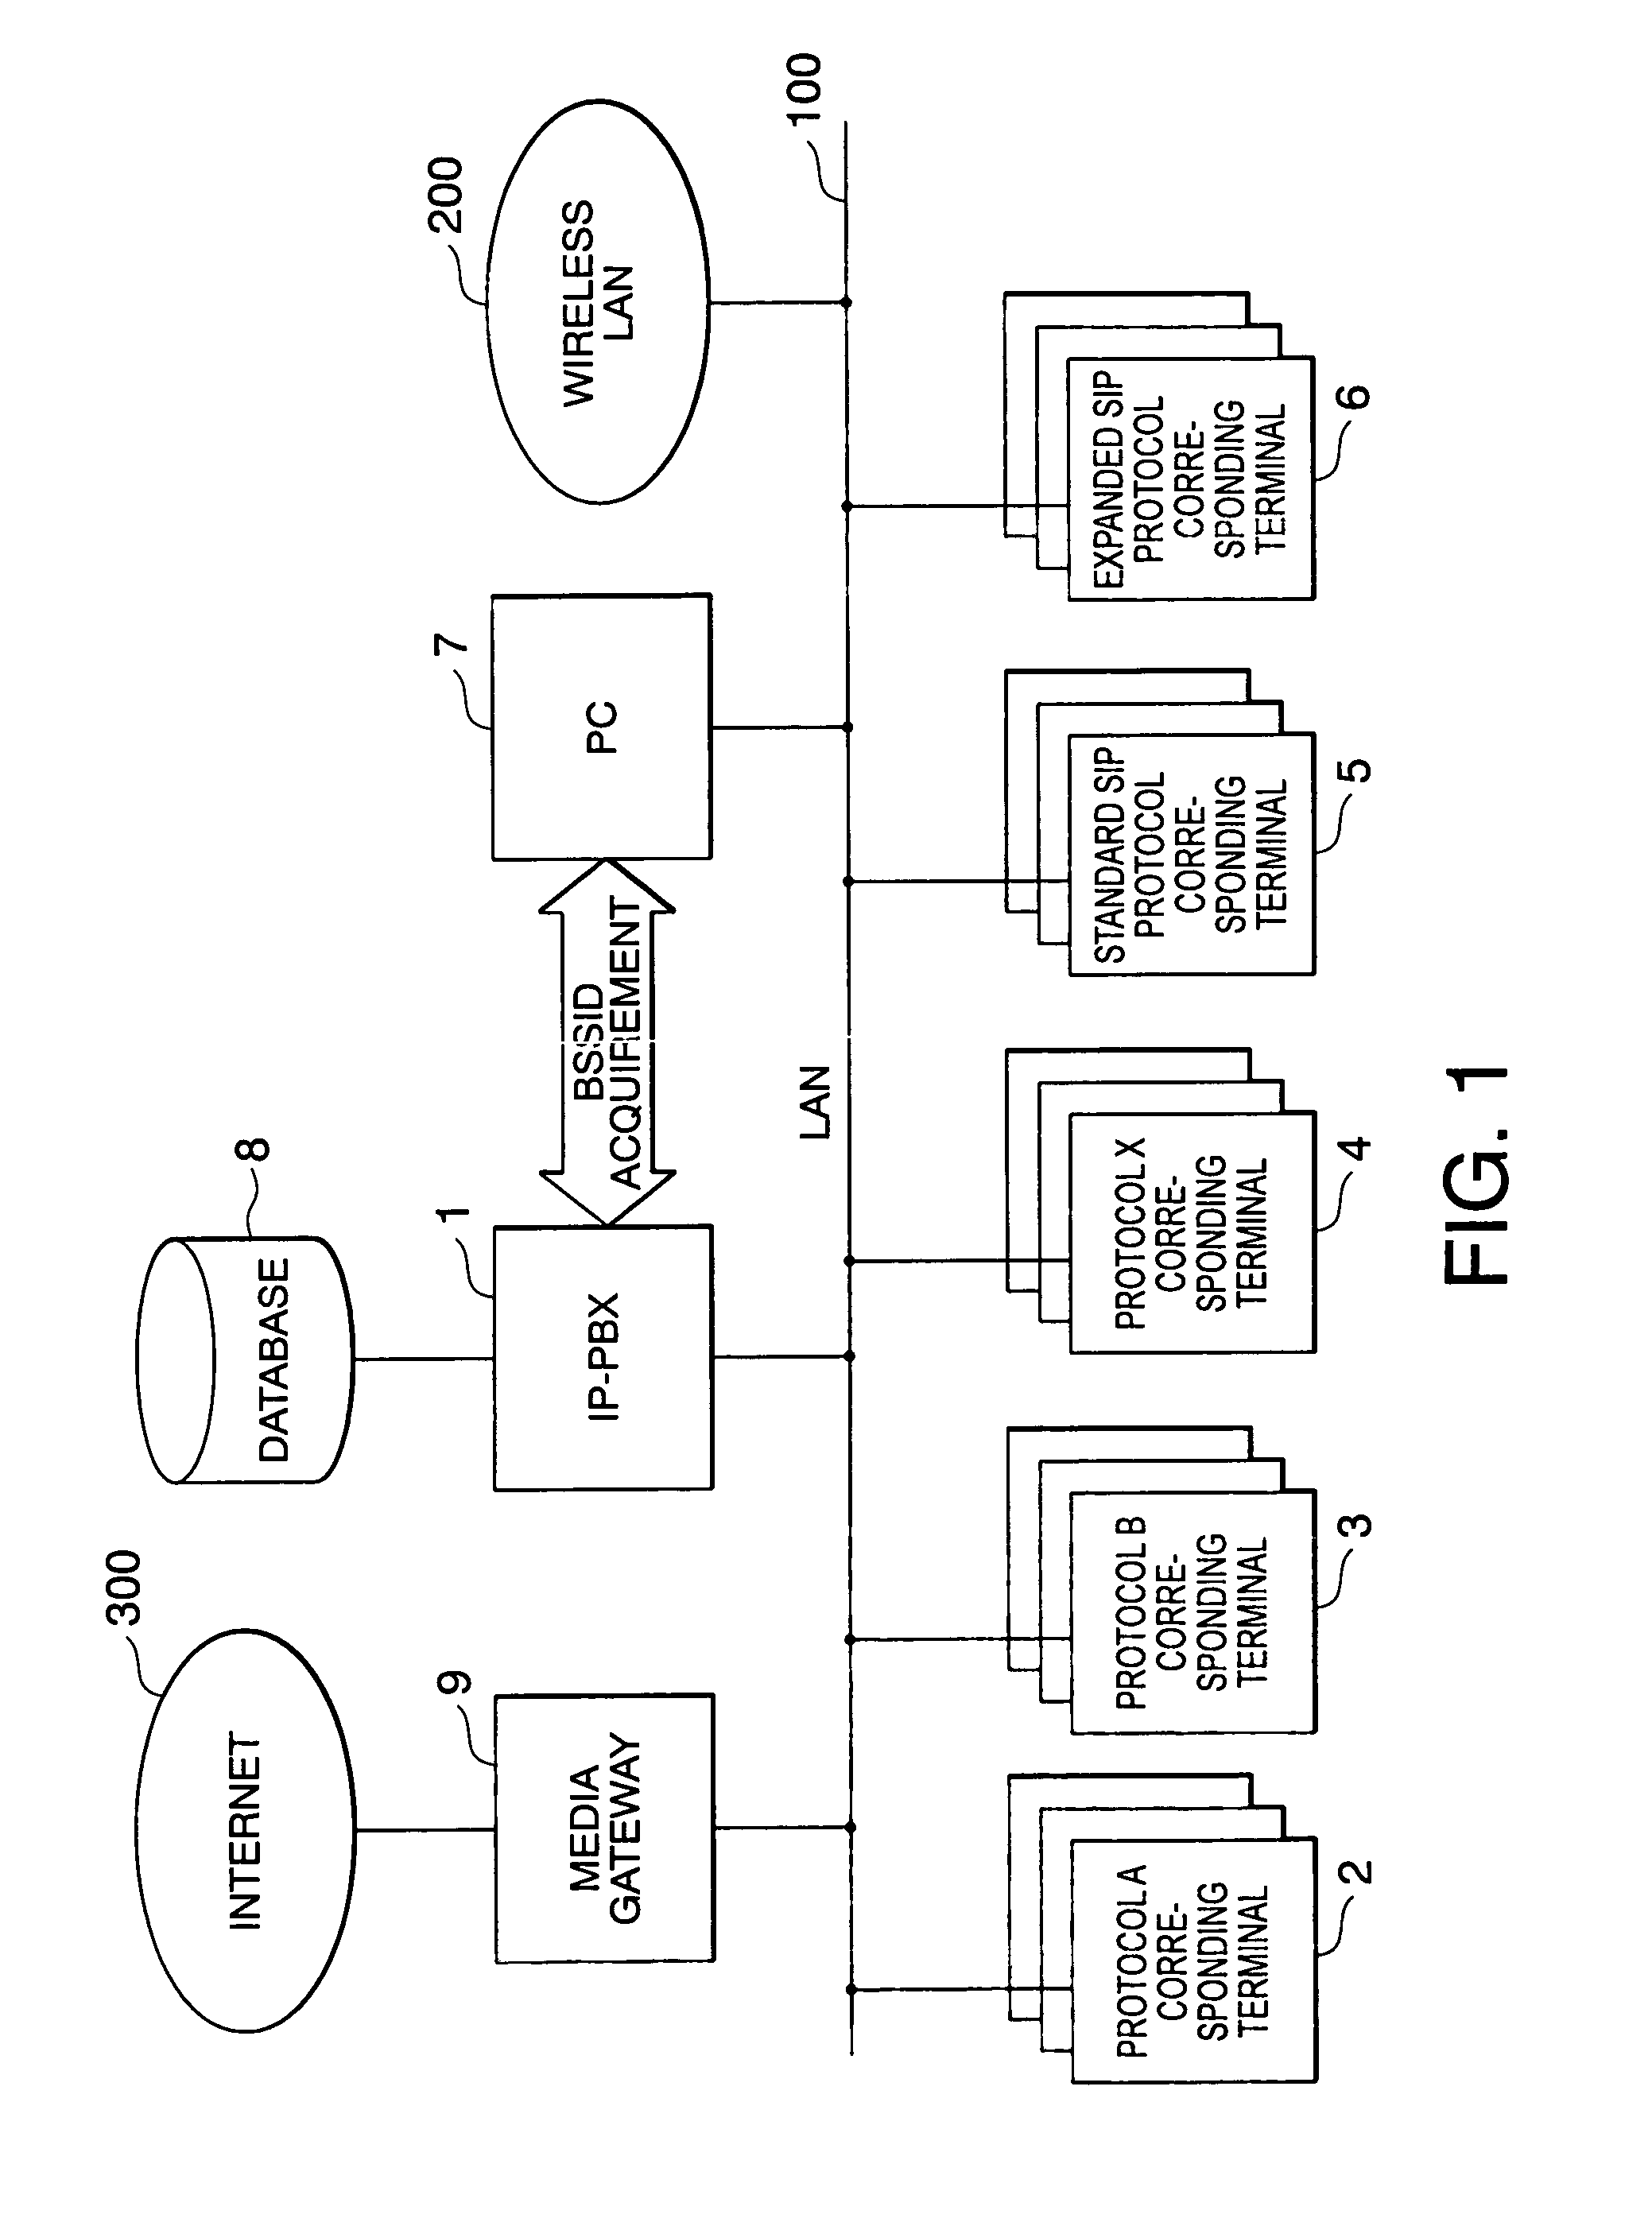 Network, private branch exchange, wireless LAN terminal, and multiprotocol communication terminal control method therefor